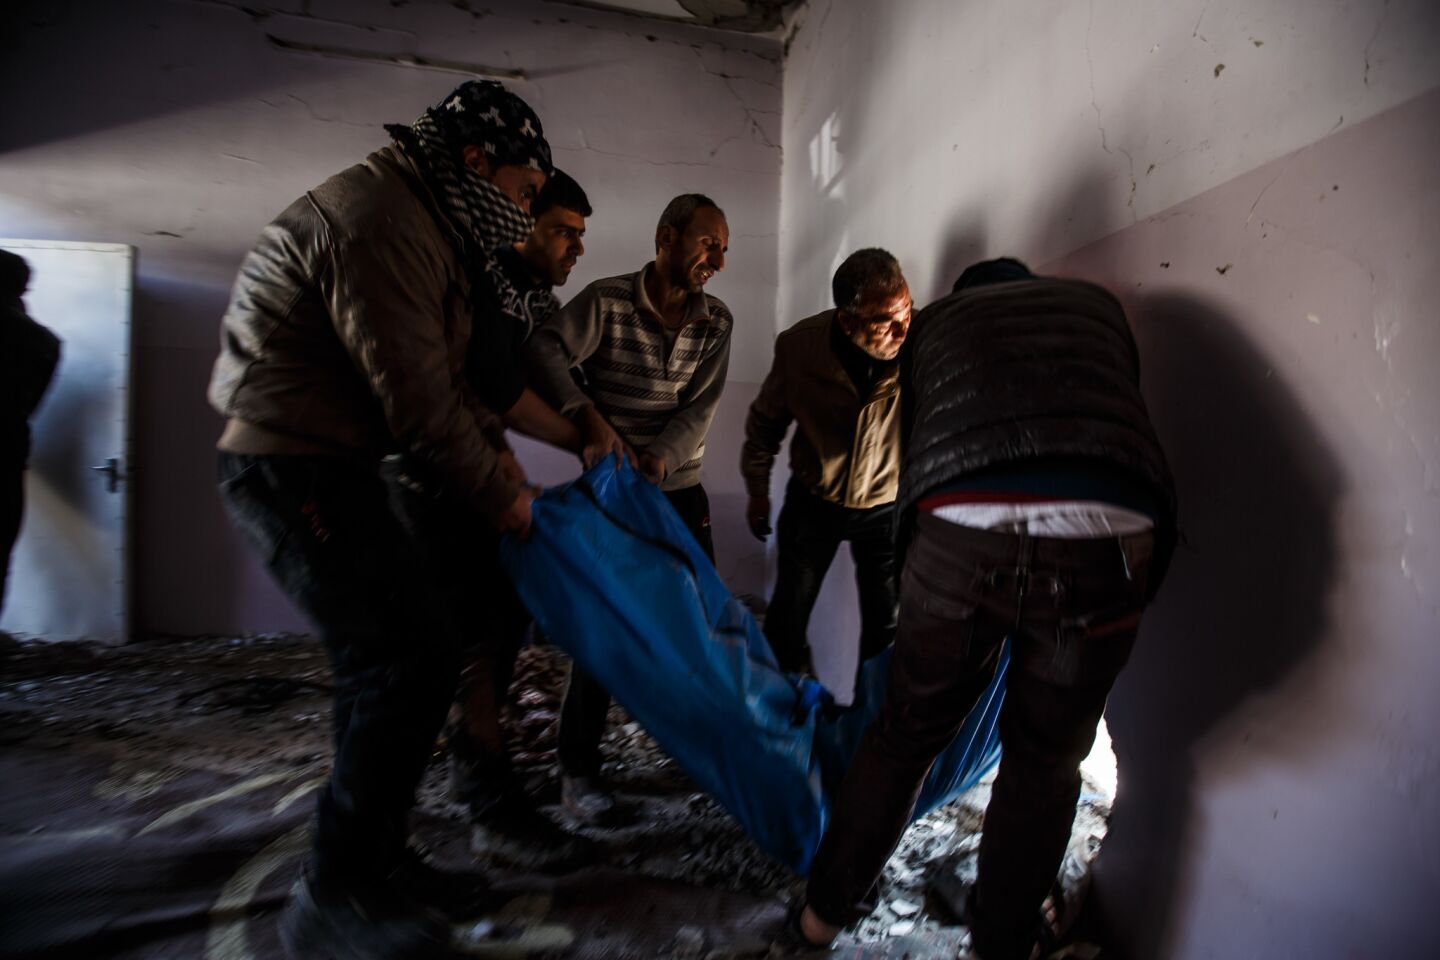 Iraqi residents carry out body bags after recovering corpses from the rubble inside a house destroyed by an airstrike in Mosul.